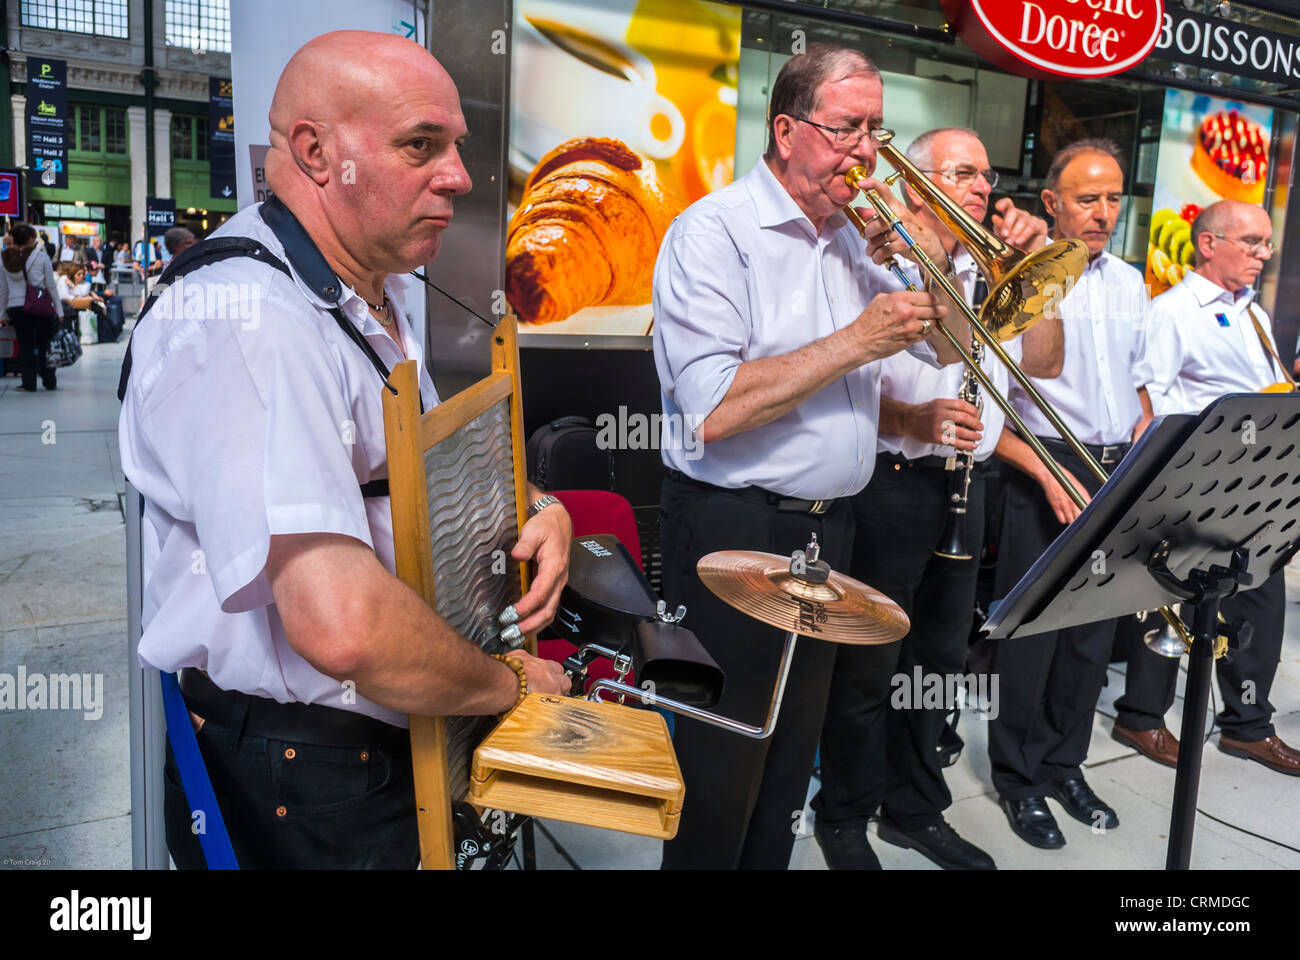 World Music Day, Paris, France, Group of Men, New Orleans Jazz Band, Orchestra Performing Train Station, National Music Festival, 'Fete de la Musique', American Spring Jazz Band Concert, elderly people make music together Stock Photo